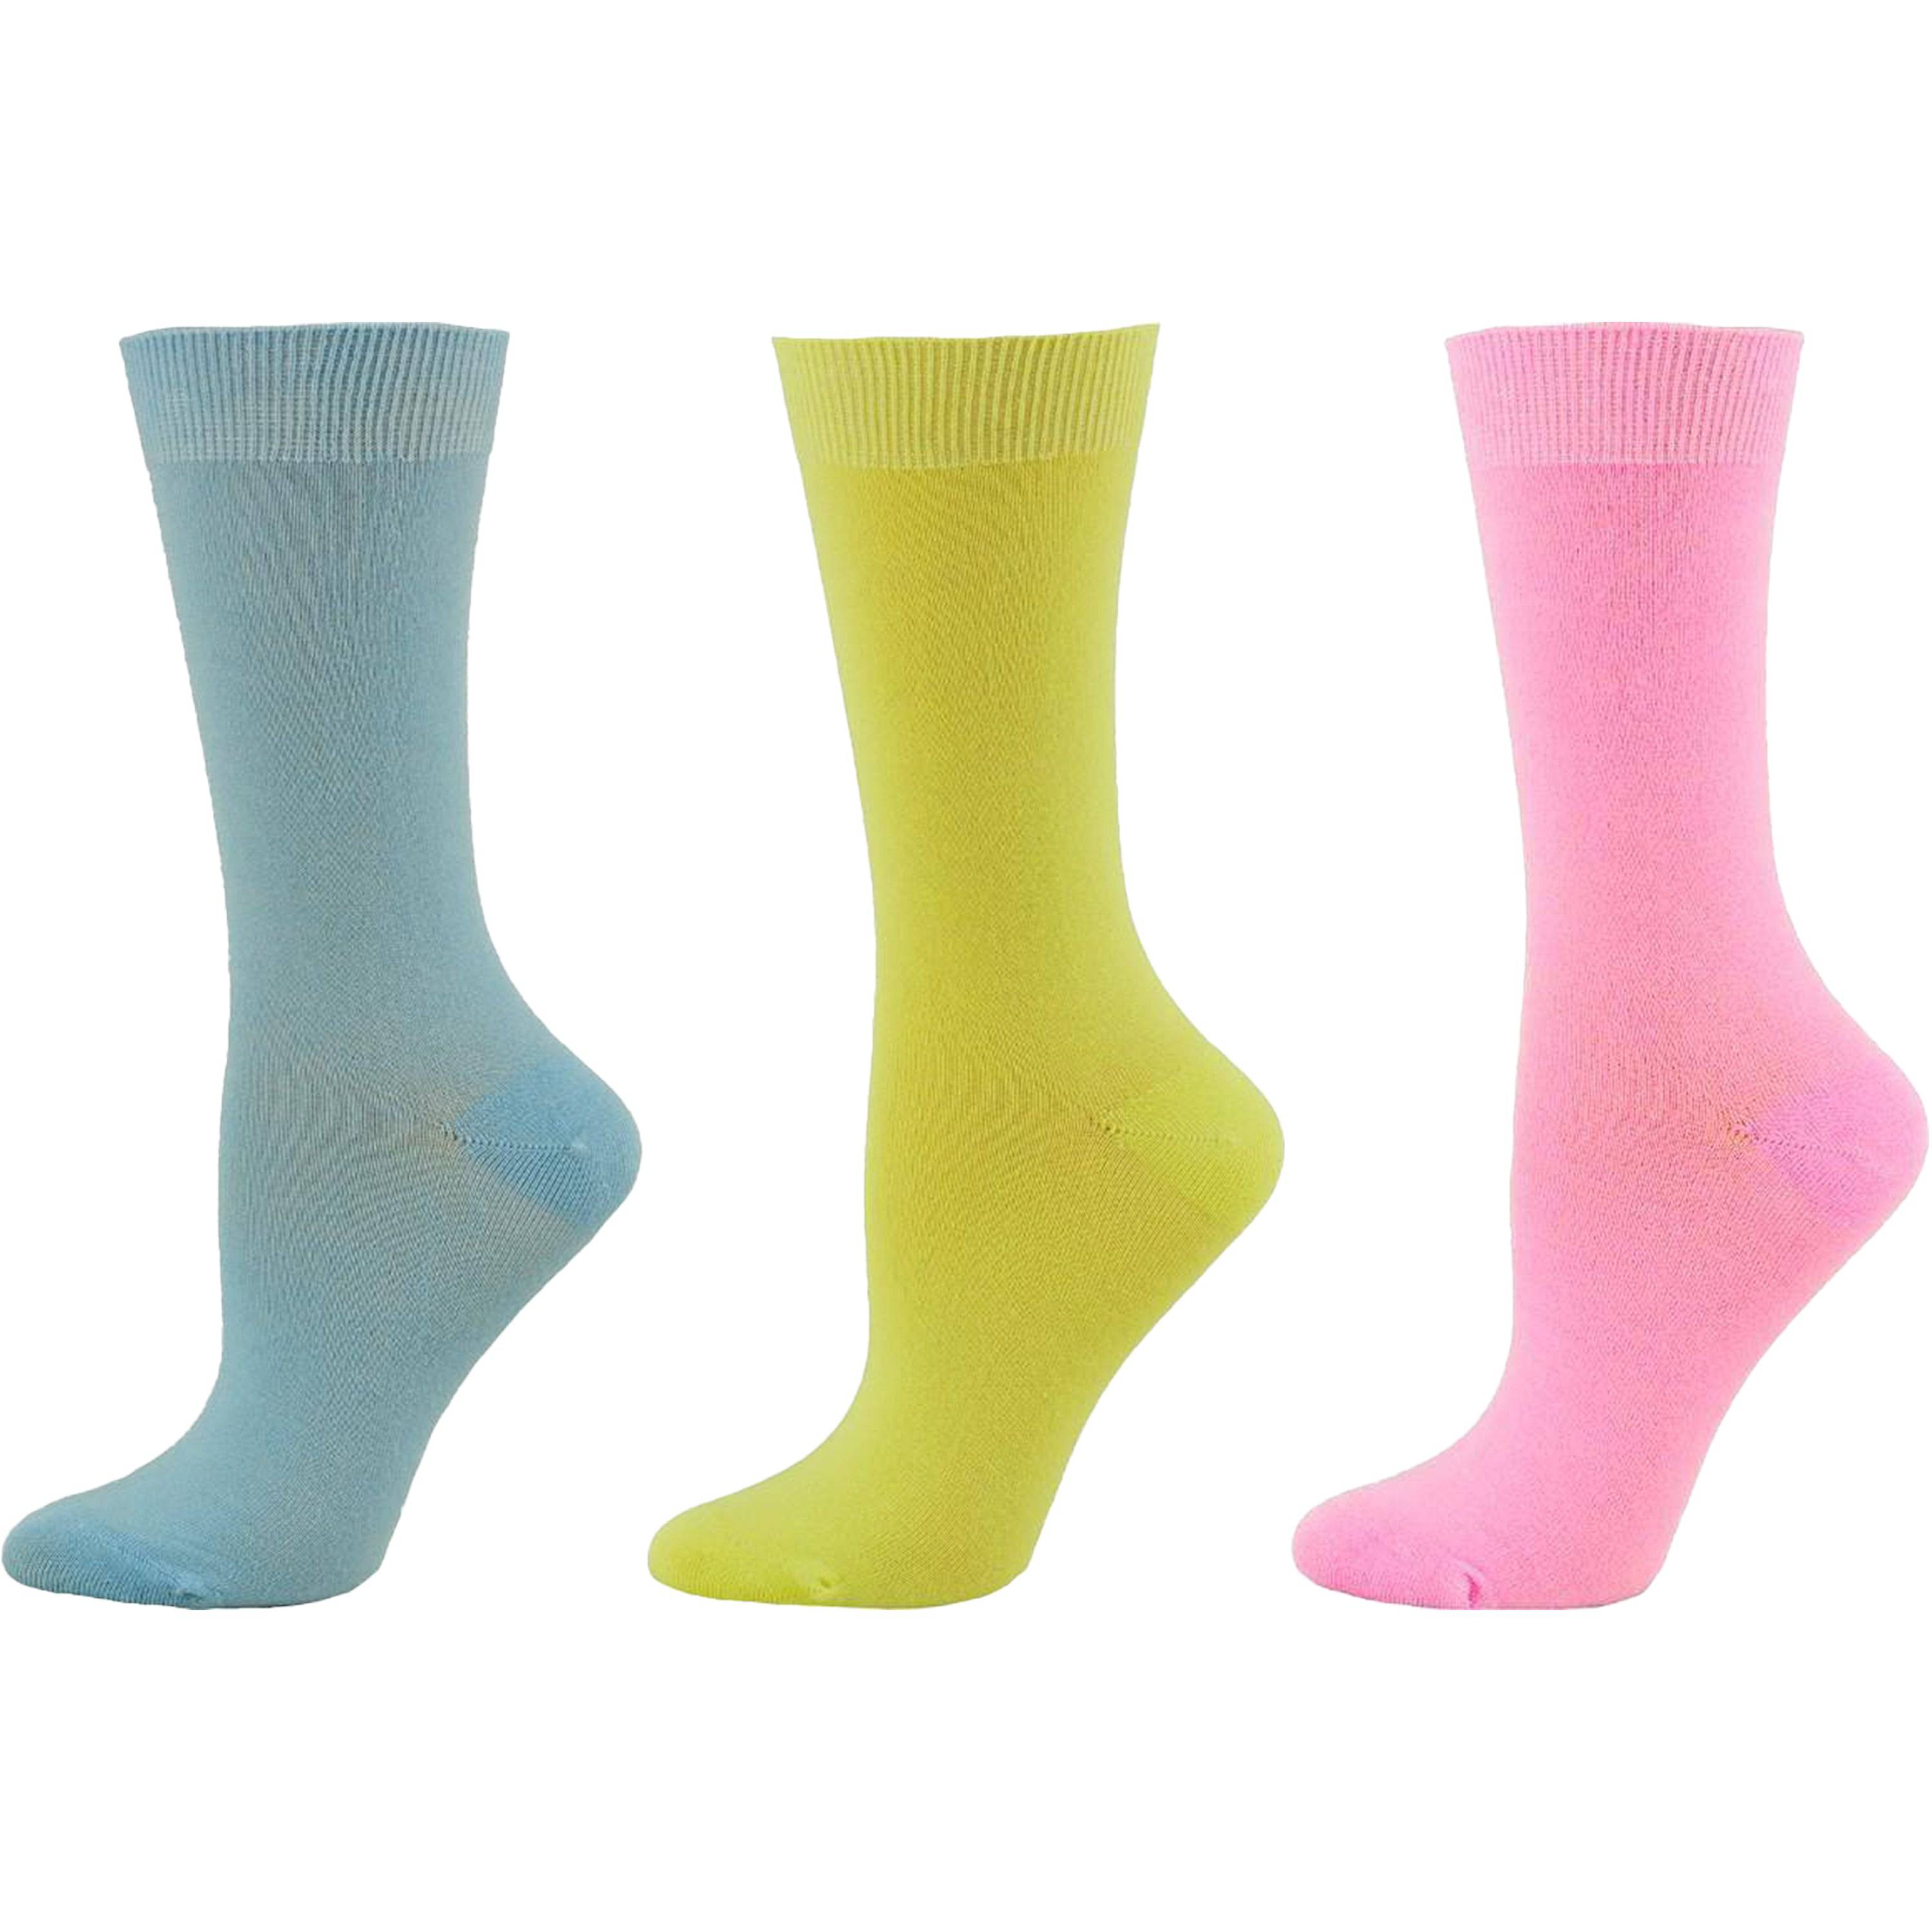 Women's Solid Color Bamboo Crew Socks - 3 Pairs